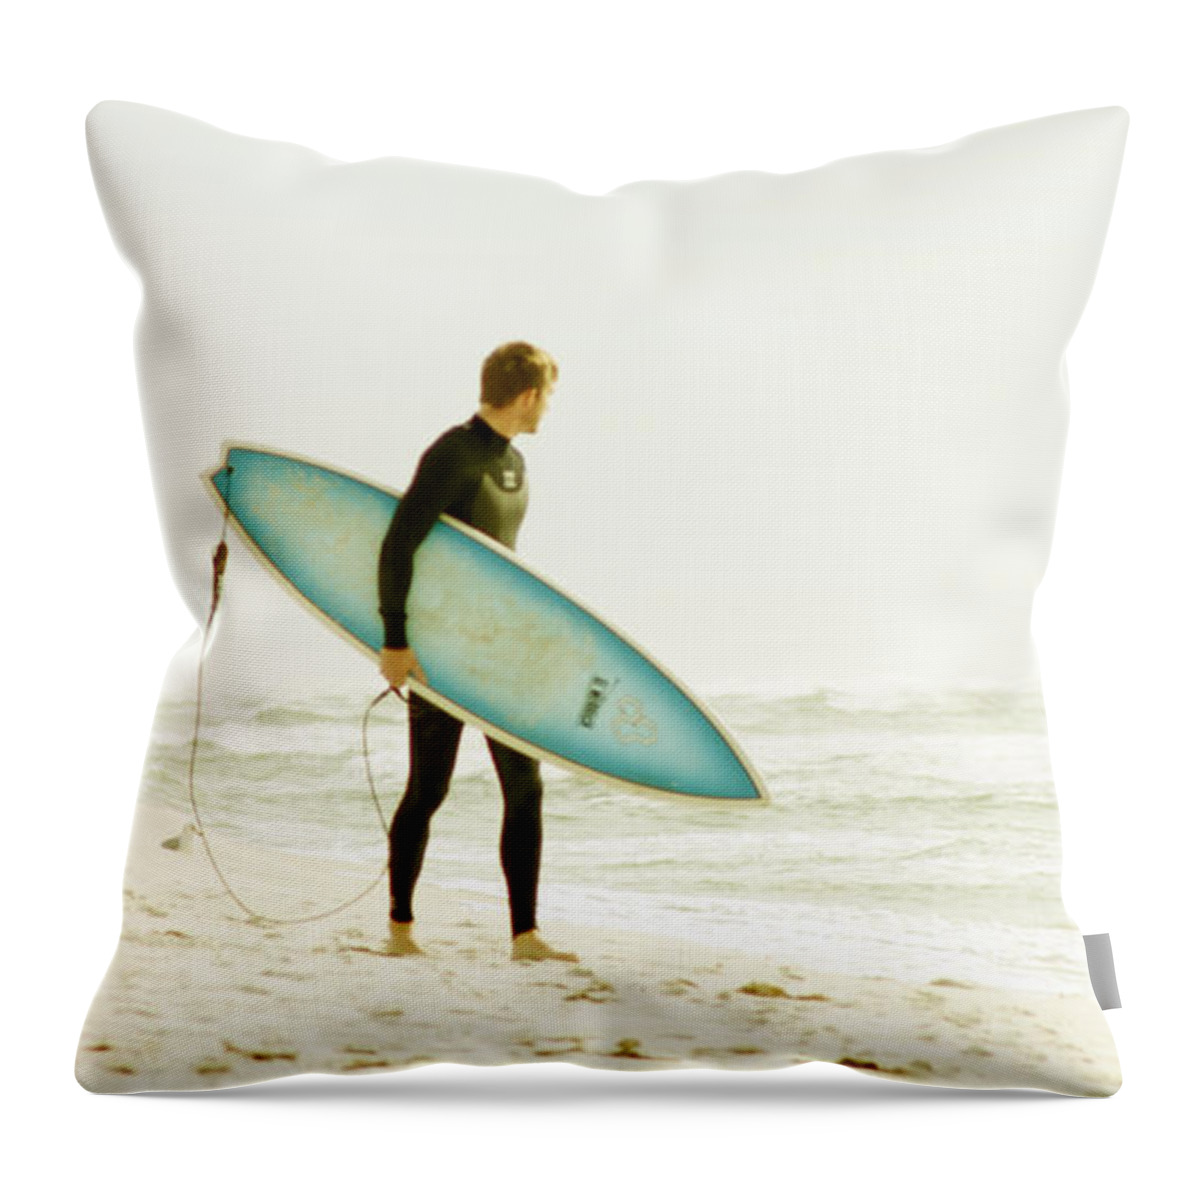 Seascape Throw Pillow featuring the photograph Early Surf by Lindy Brown